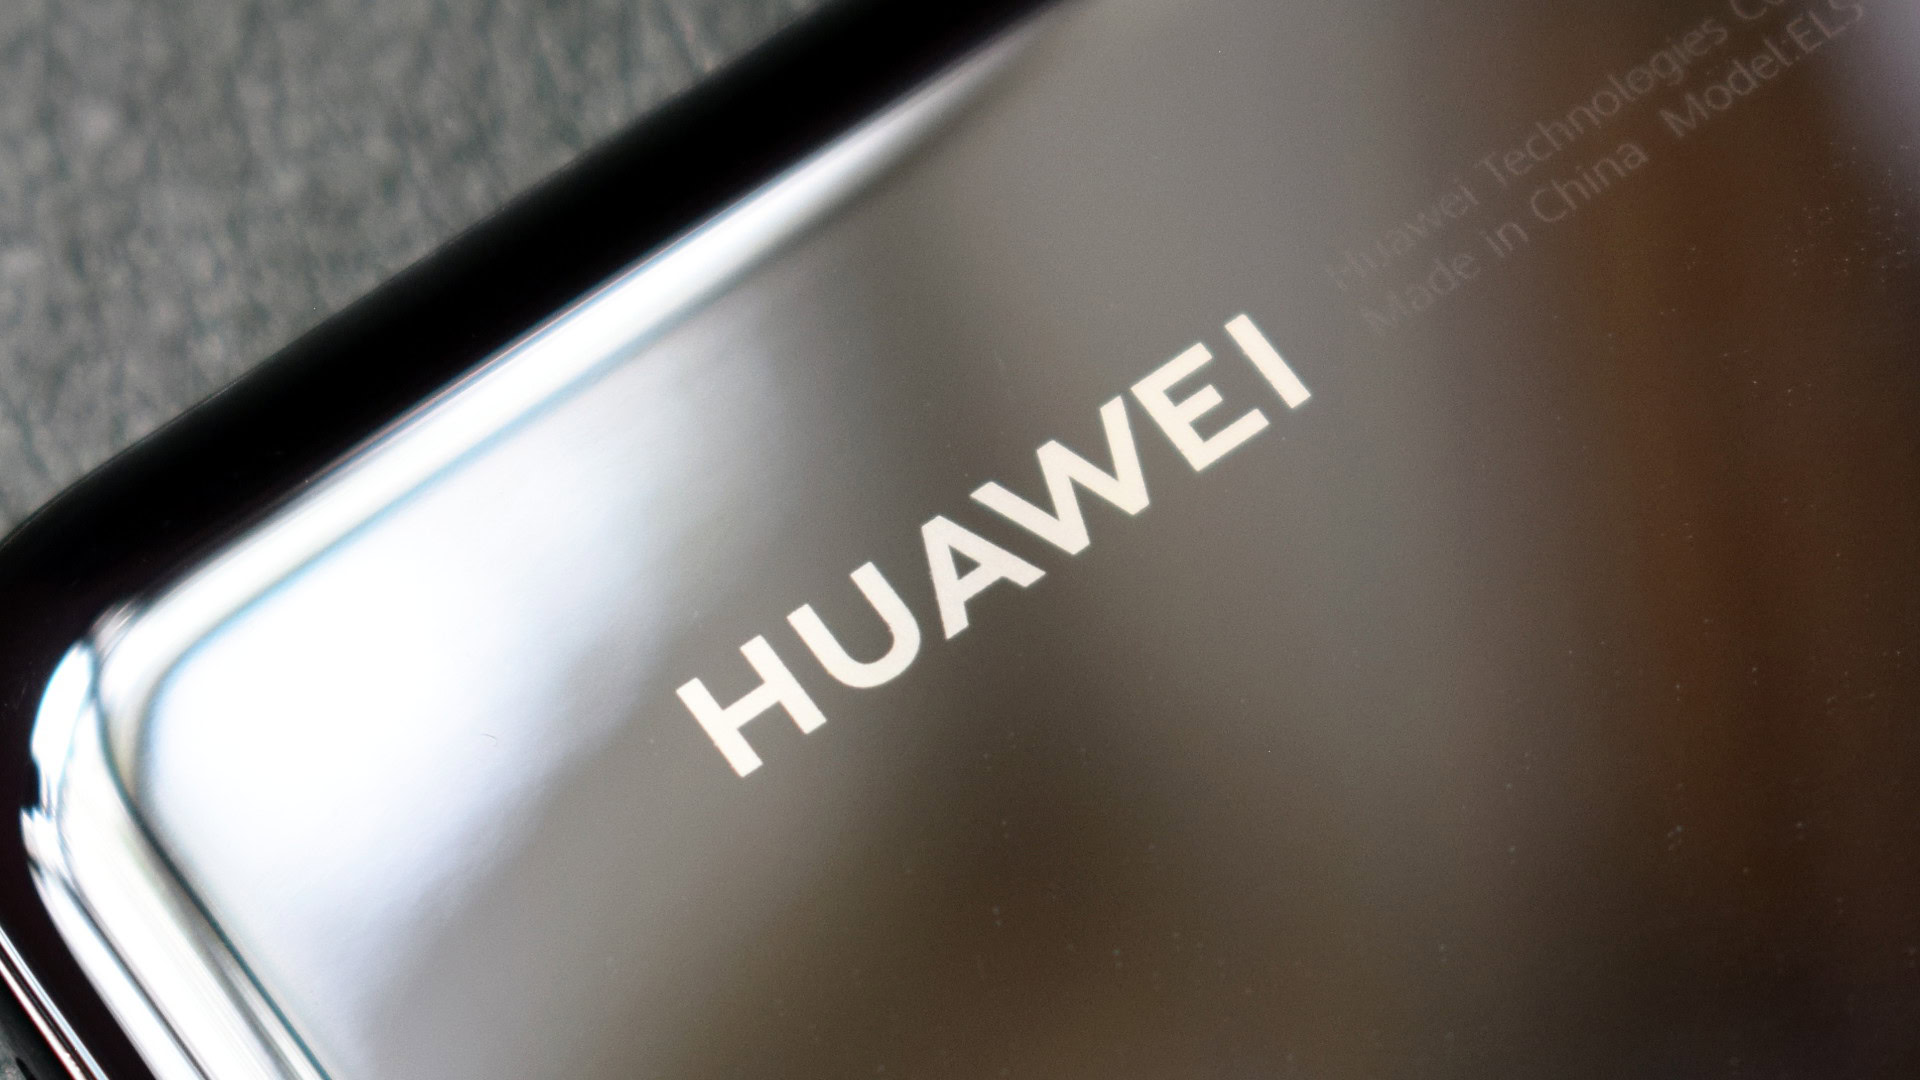 huawei android phones 2022